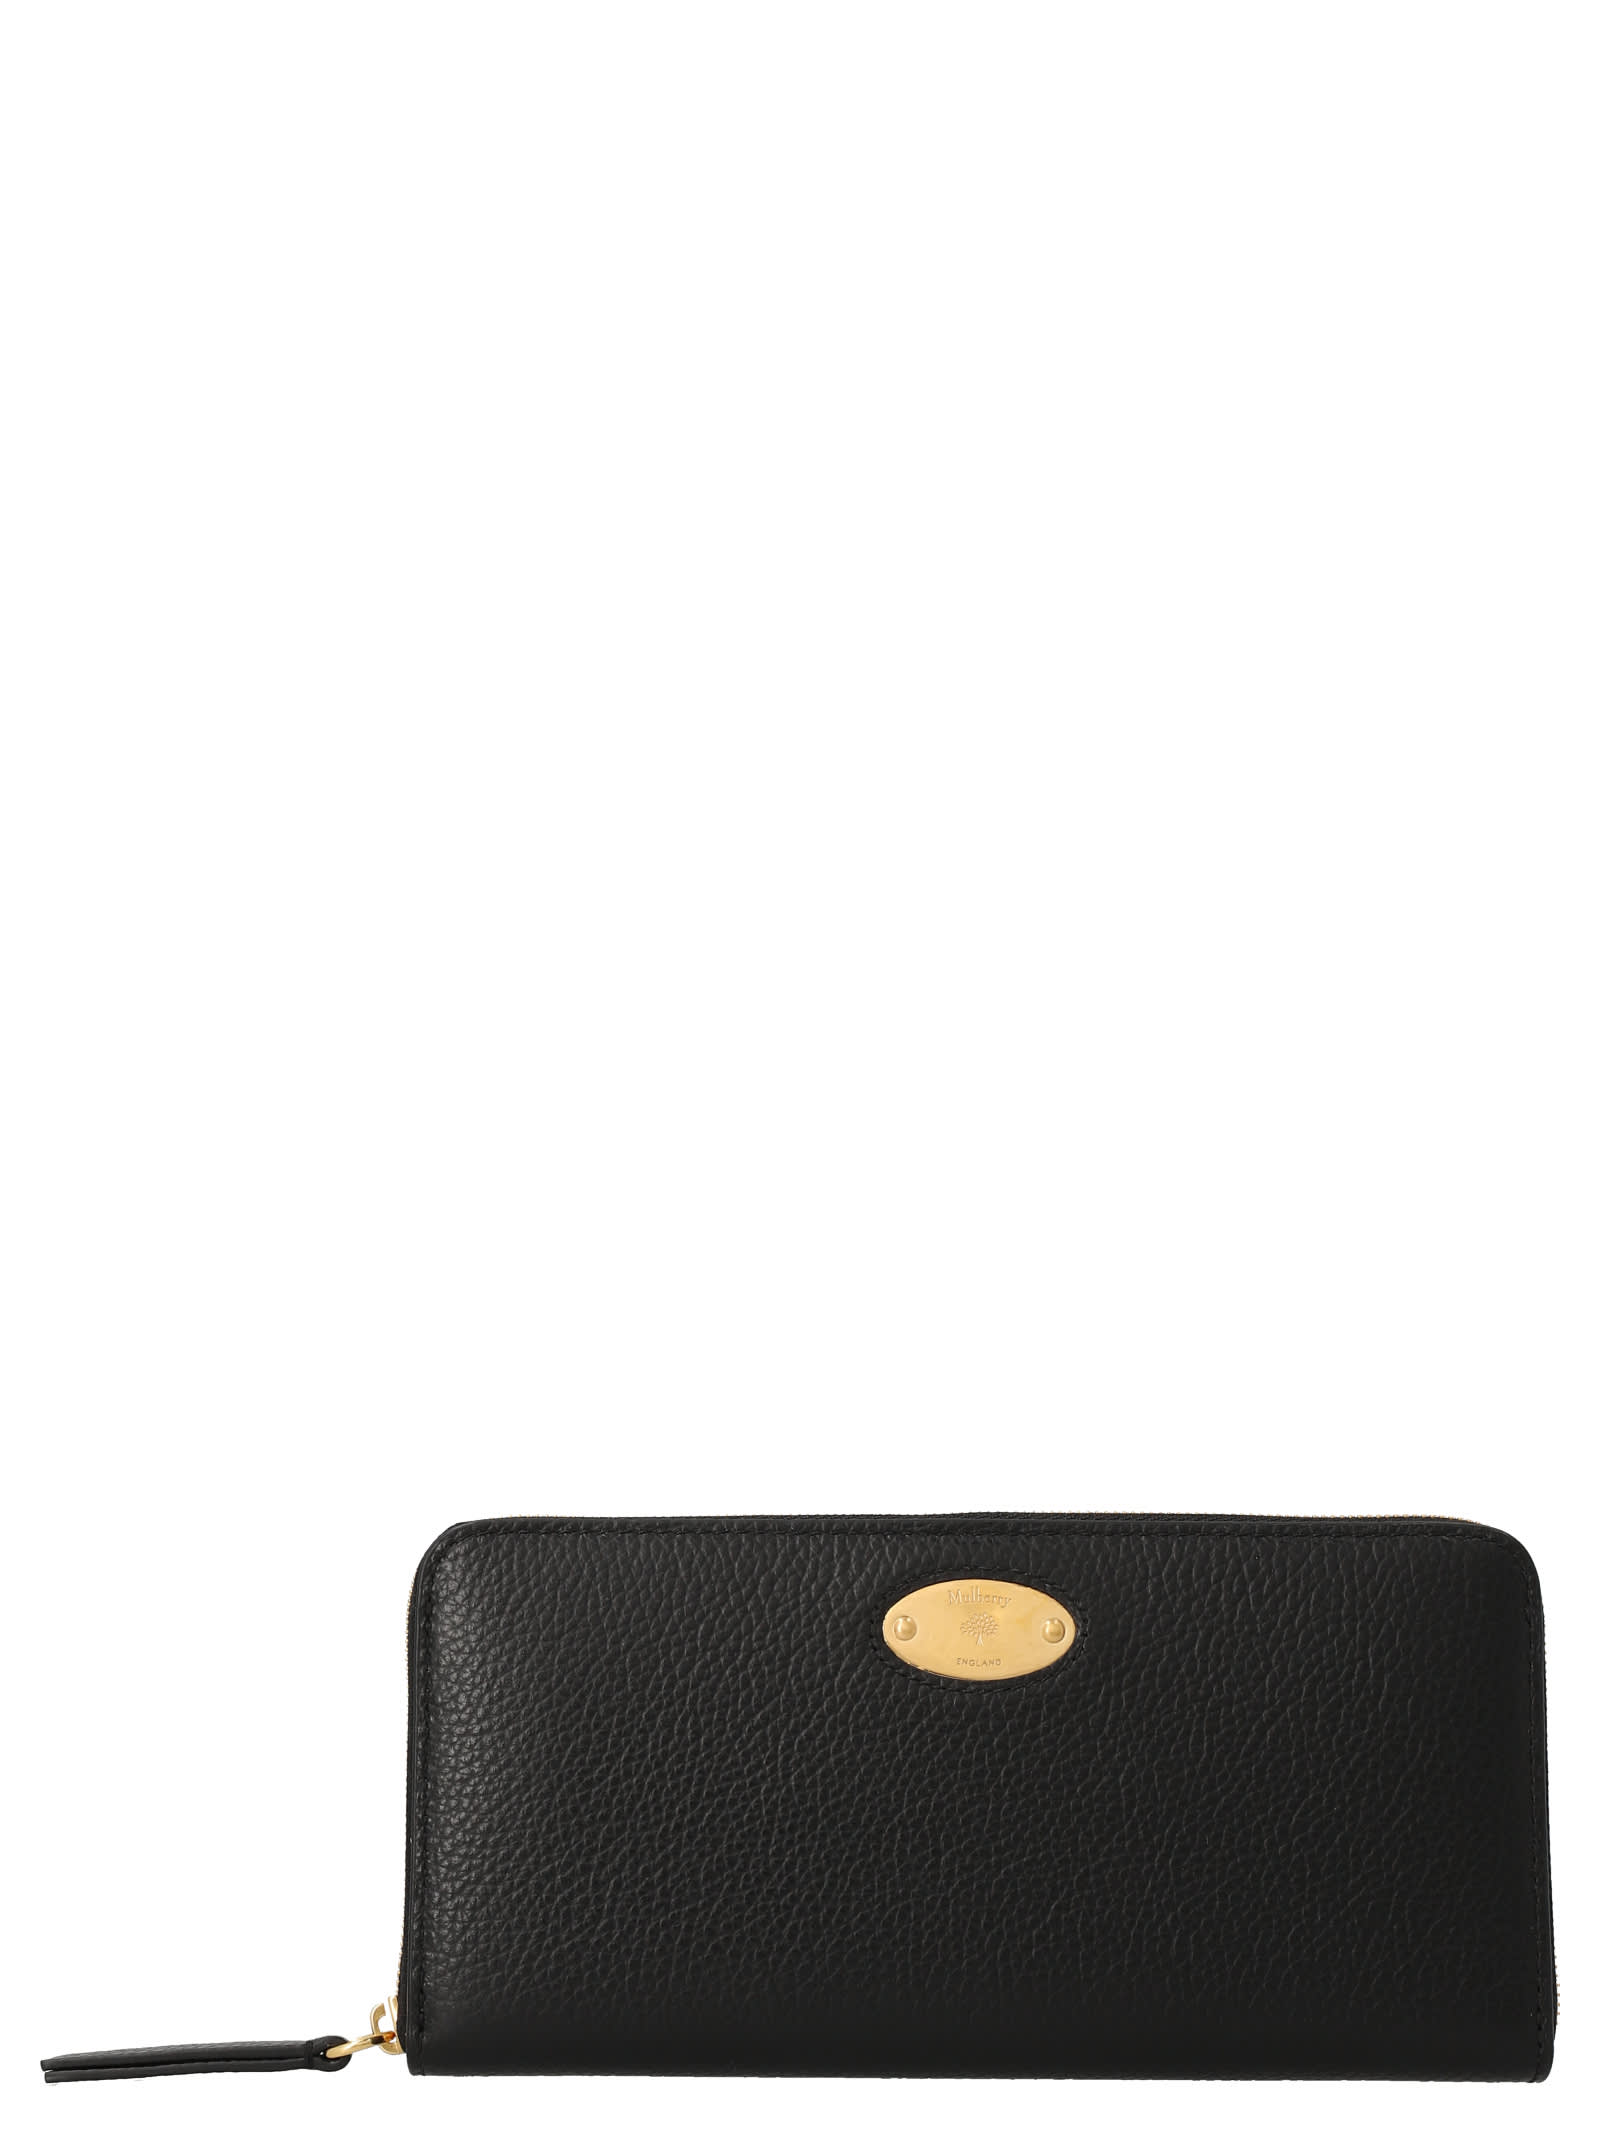 MULBERRY MULBERRY PLAQUE WALLET